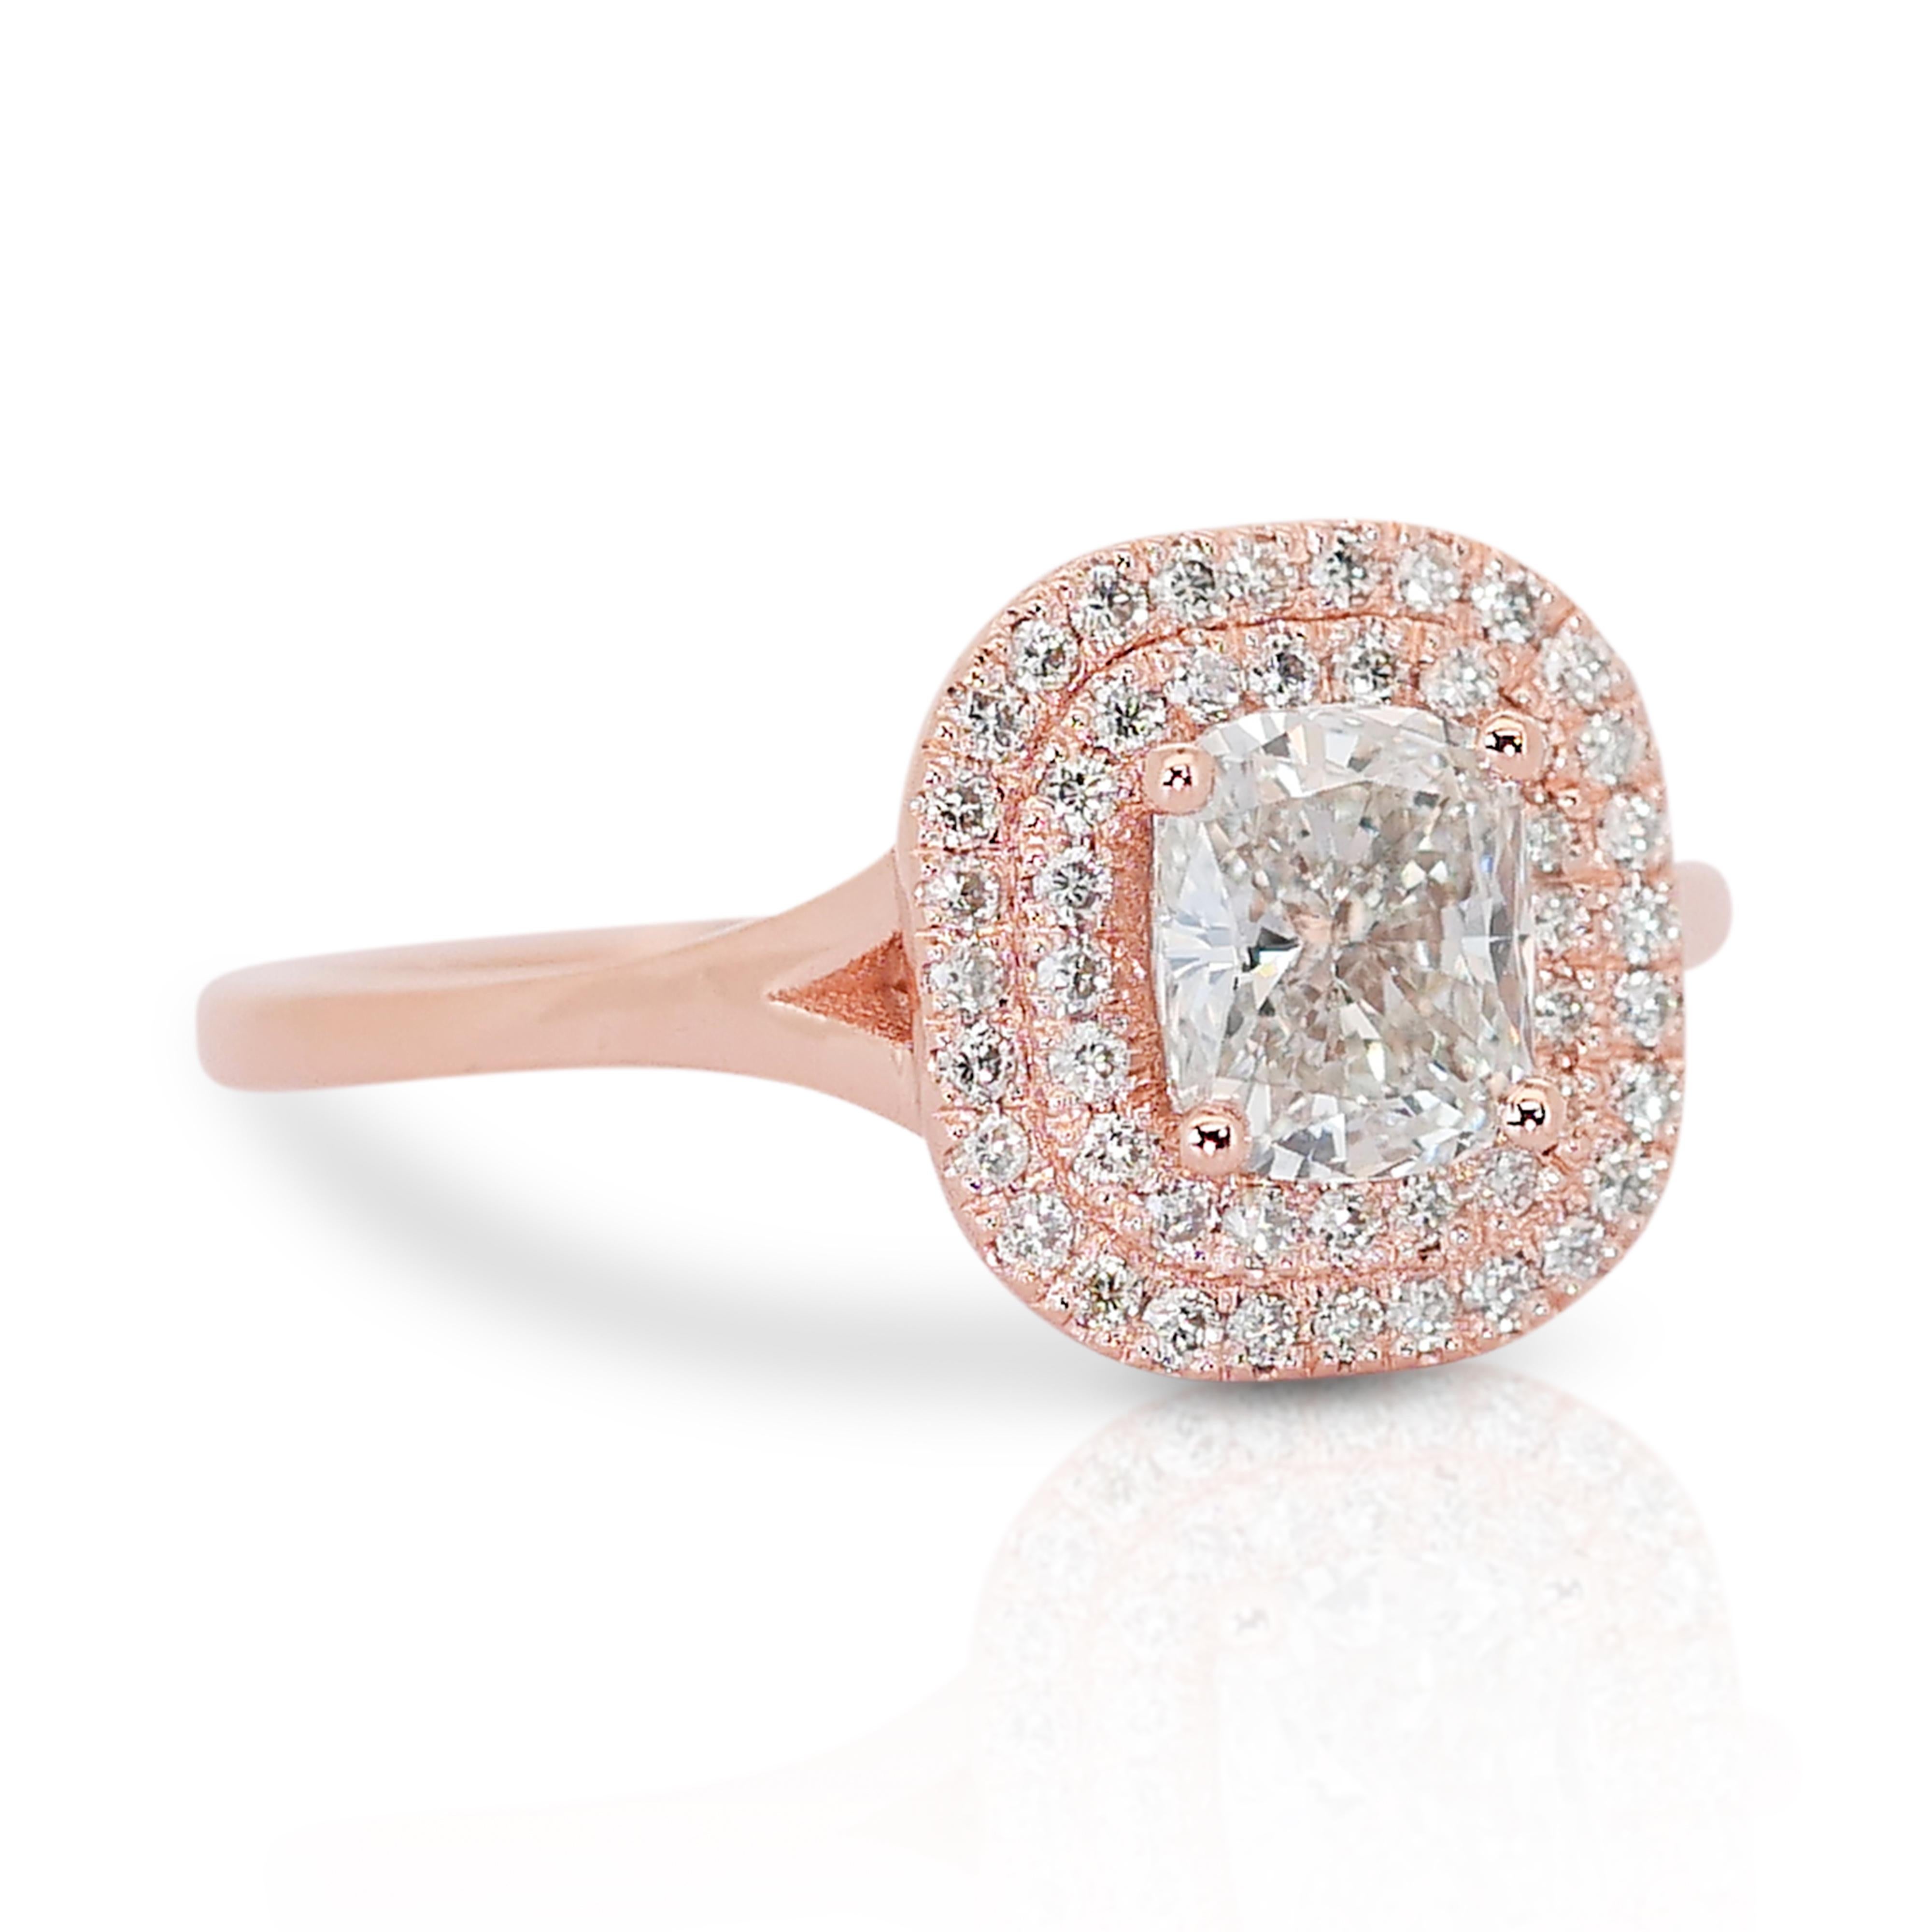 Glamorous 14k Rose Gold Double Halo Diamond Ring w/1.09 ct - IGI Certified

Immerse yourself in the allure of this magnificent 14k rose gold ring, featuring a captivating 0.85 ct rectangular cushion main diamond. Surrounded by 48 round side diamonds